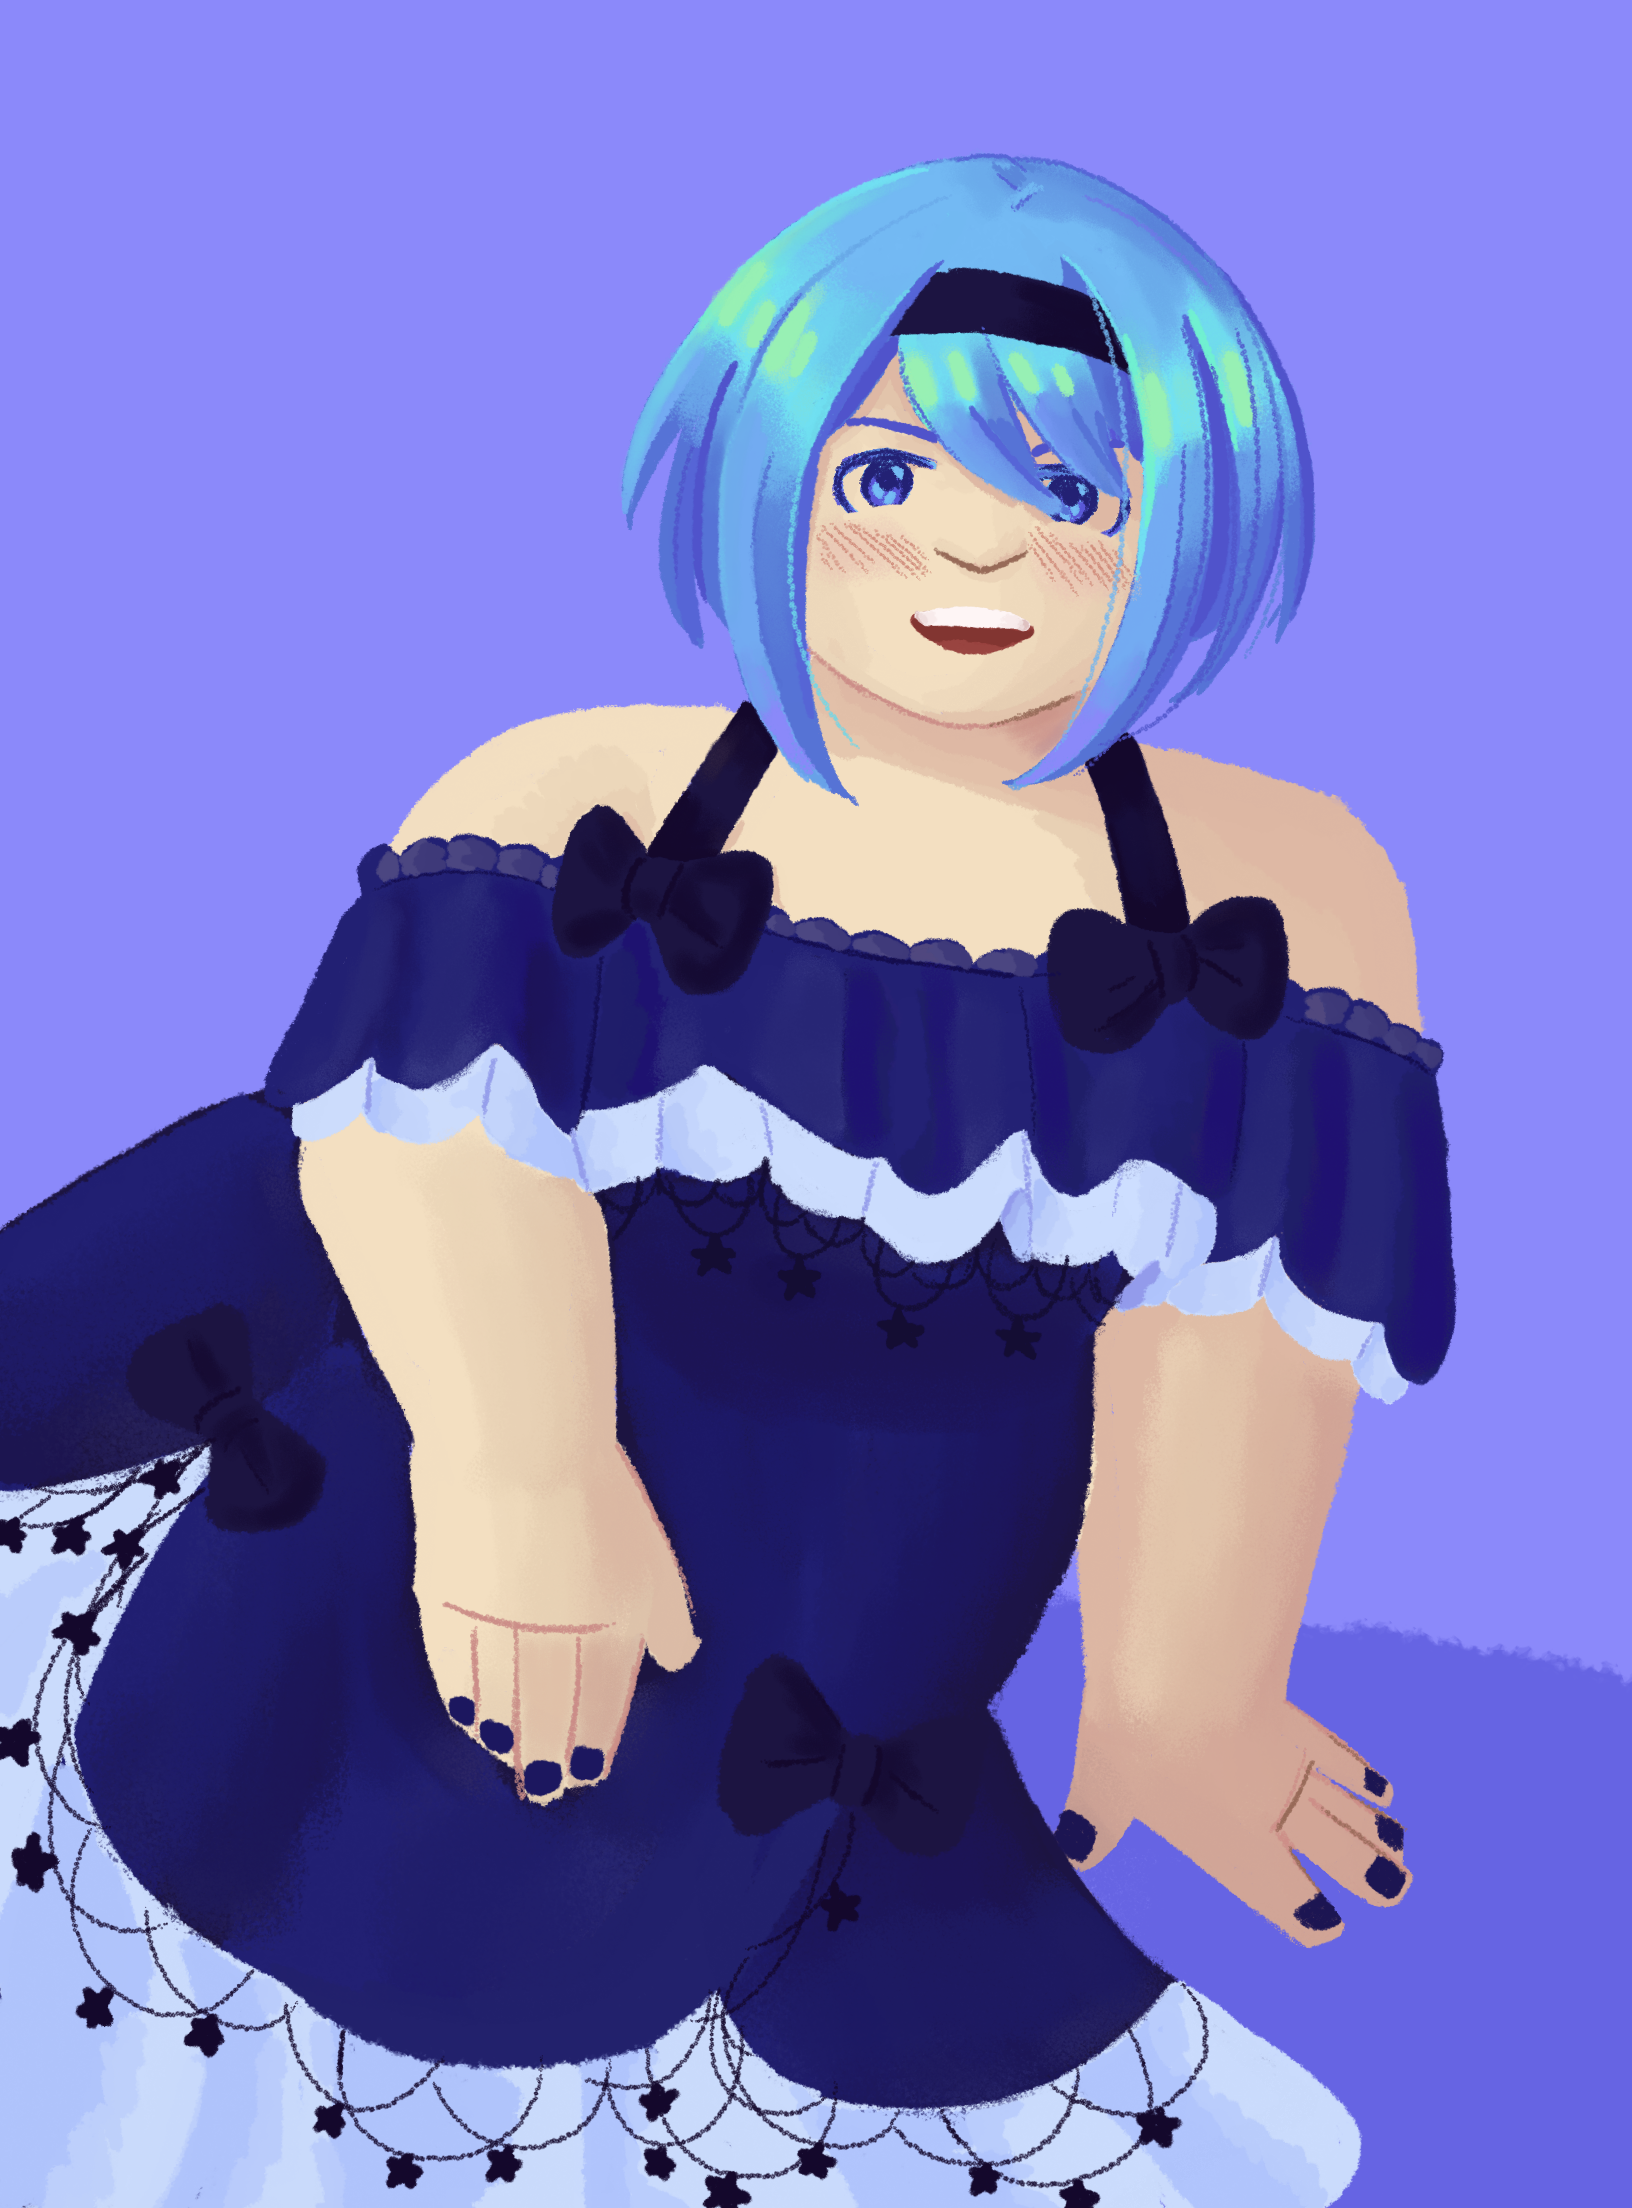 a drawing of Claire sitting. She is wearing a blue dress with strap sleeves and white trim.